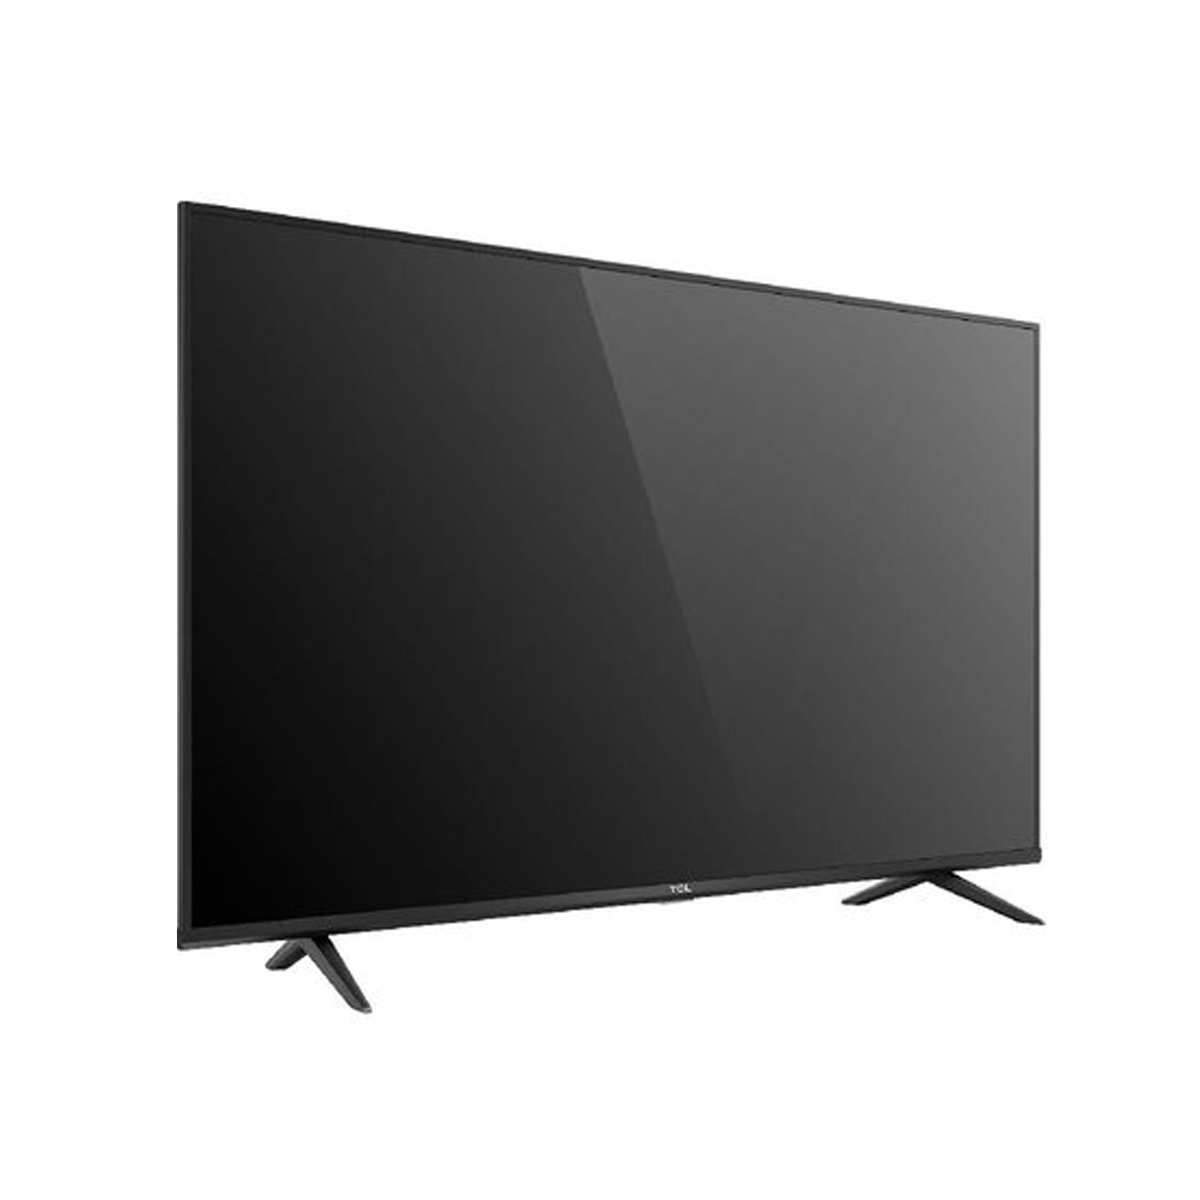 TCL 4K Android SmartTV 75T615 75'